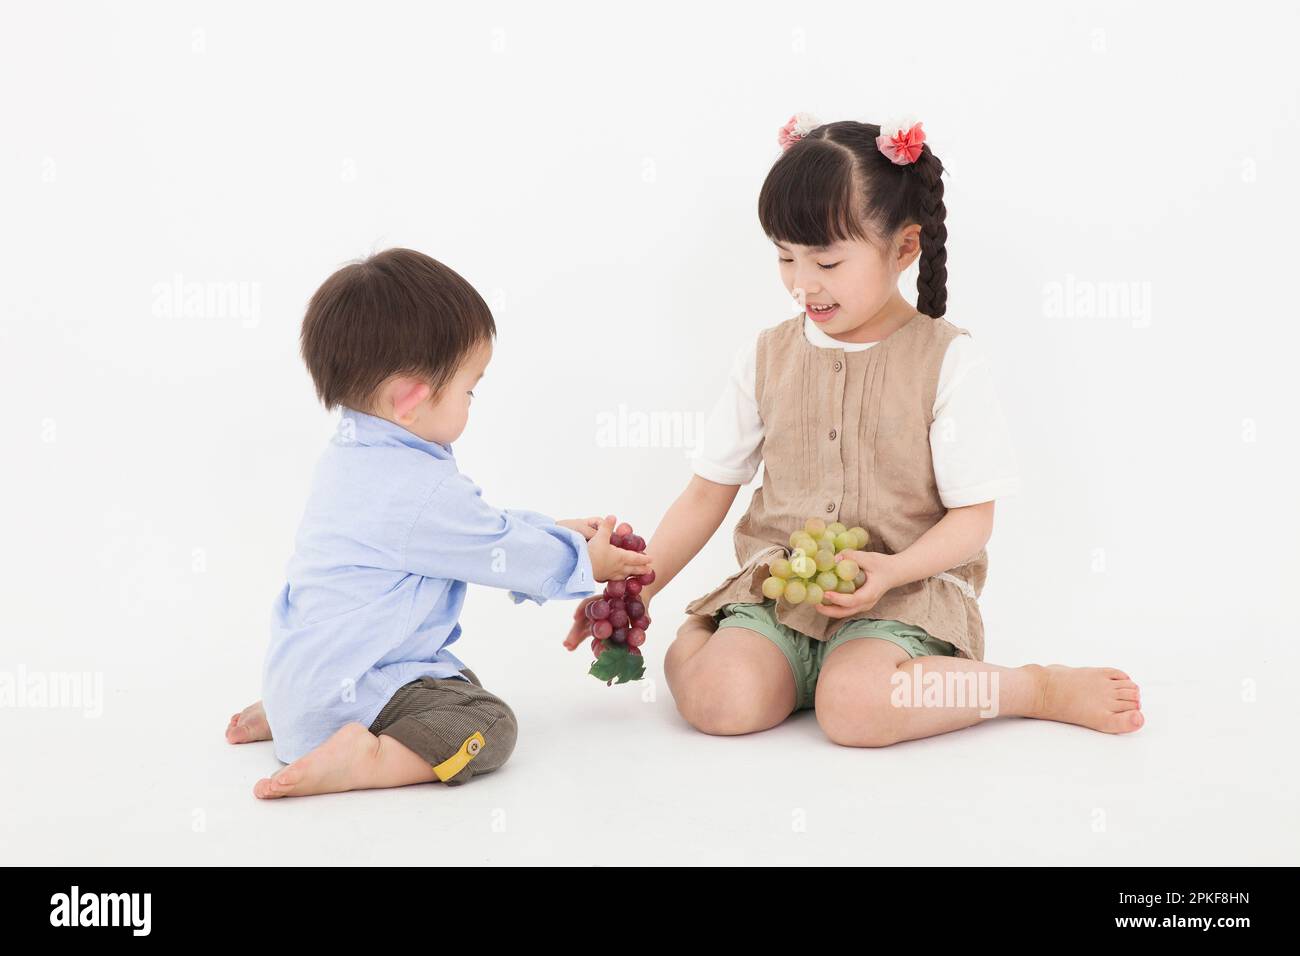 Boy and girl sitting and playing Stock Photo